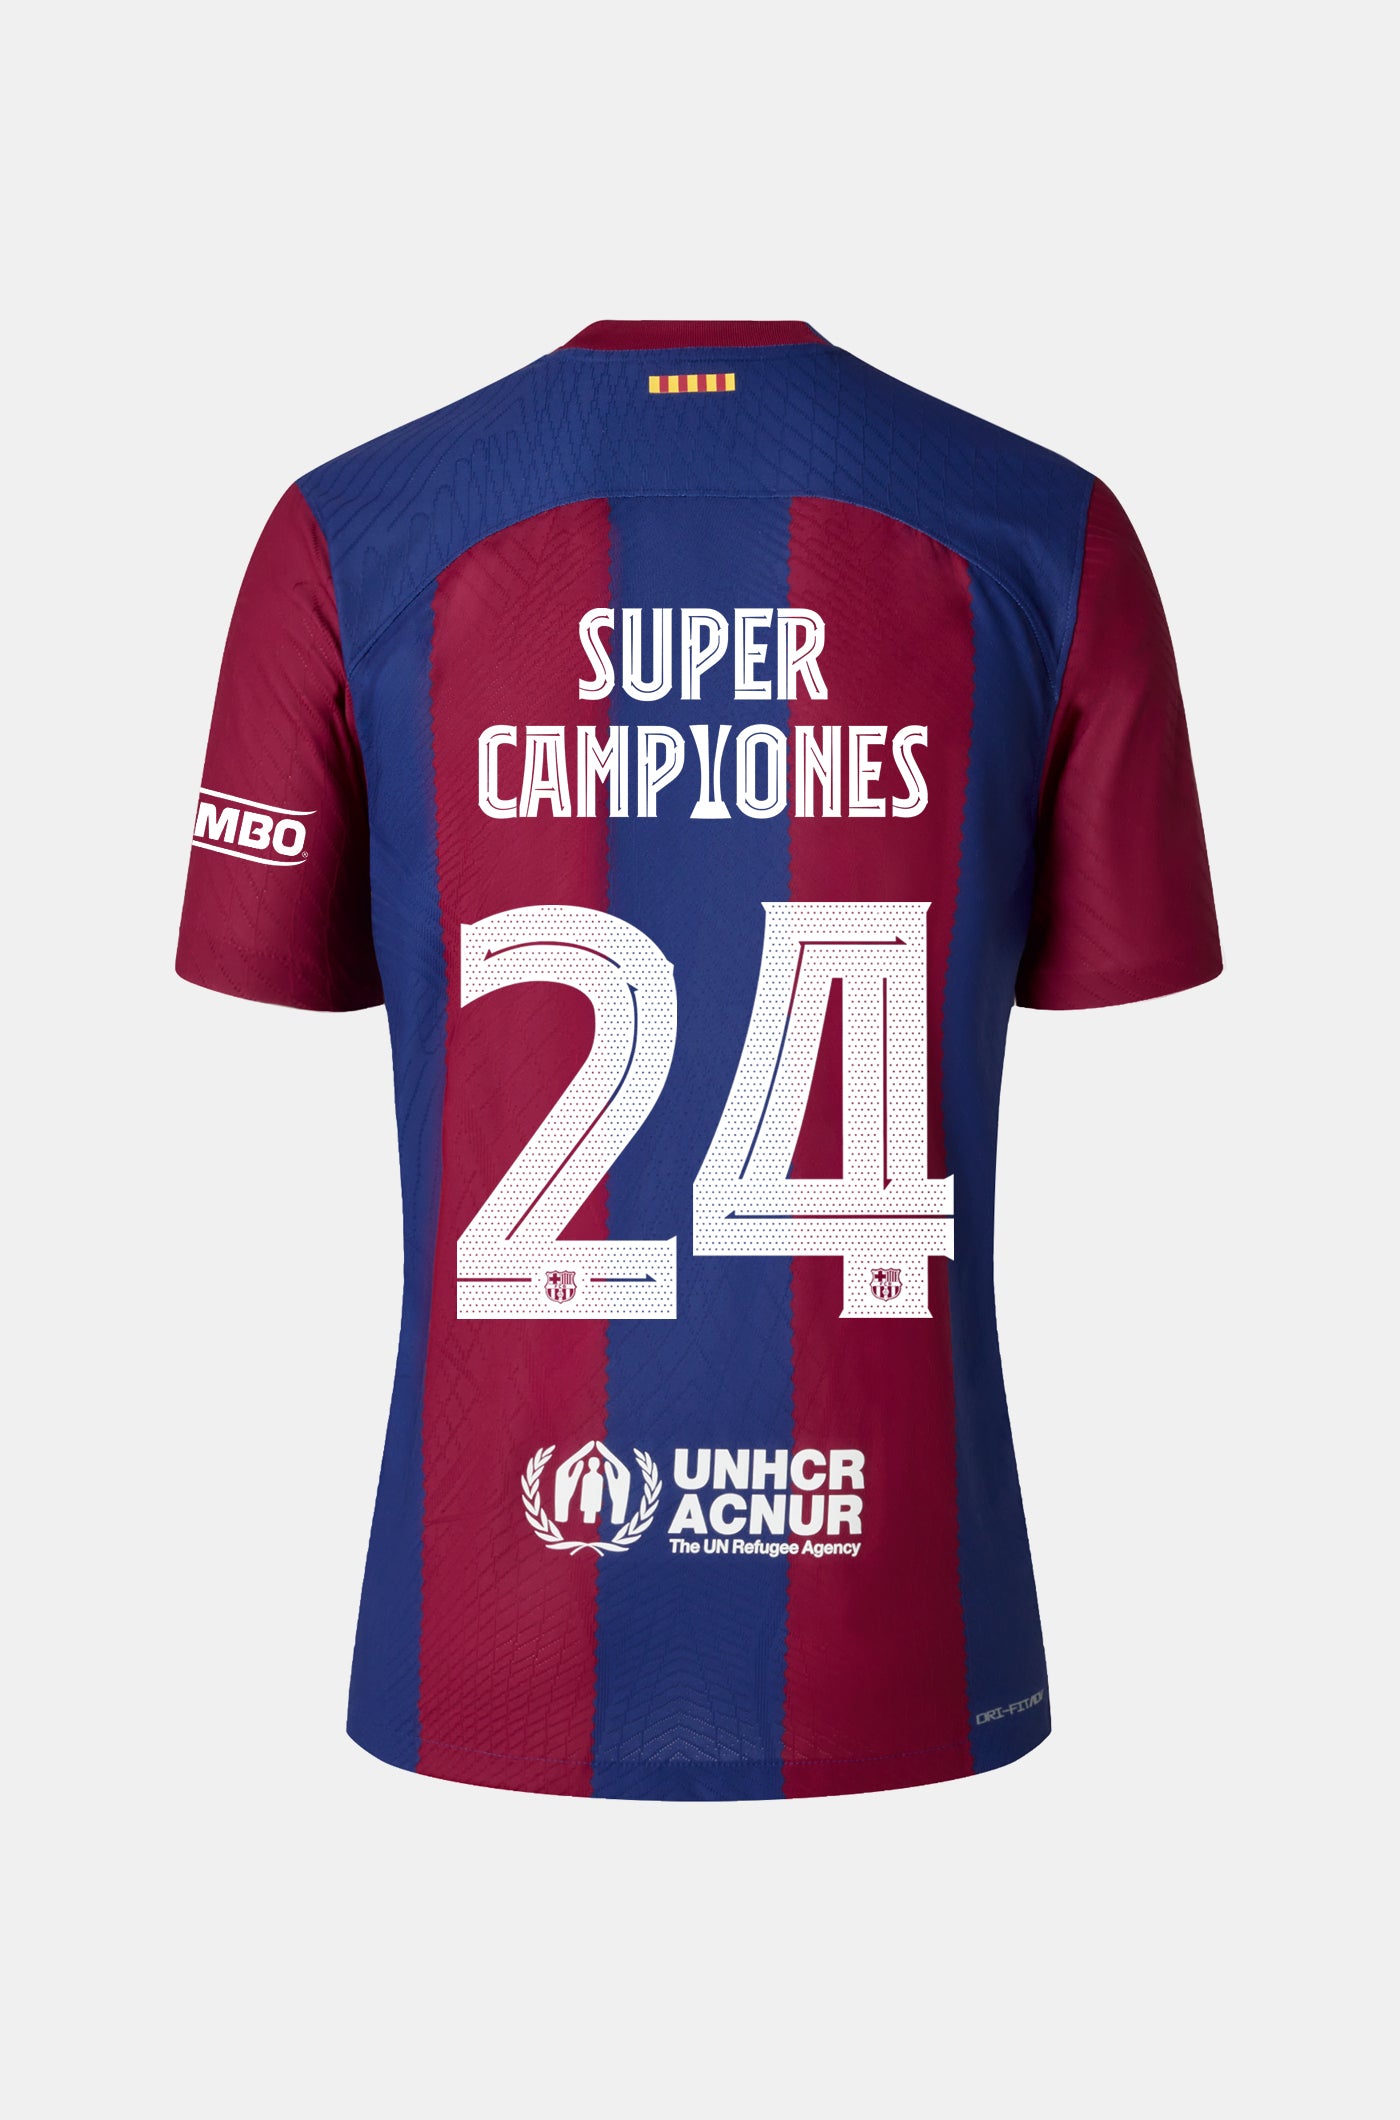 Spanish Super Cup Champions jersey 23/24